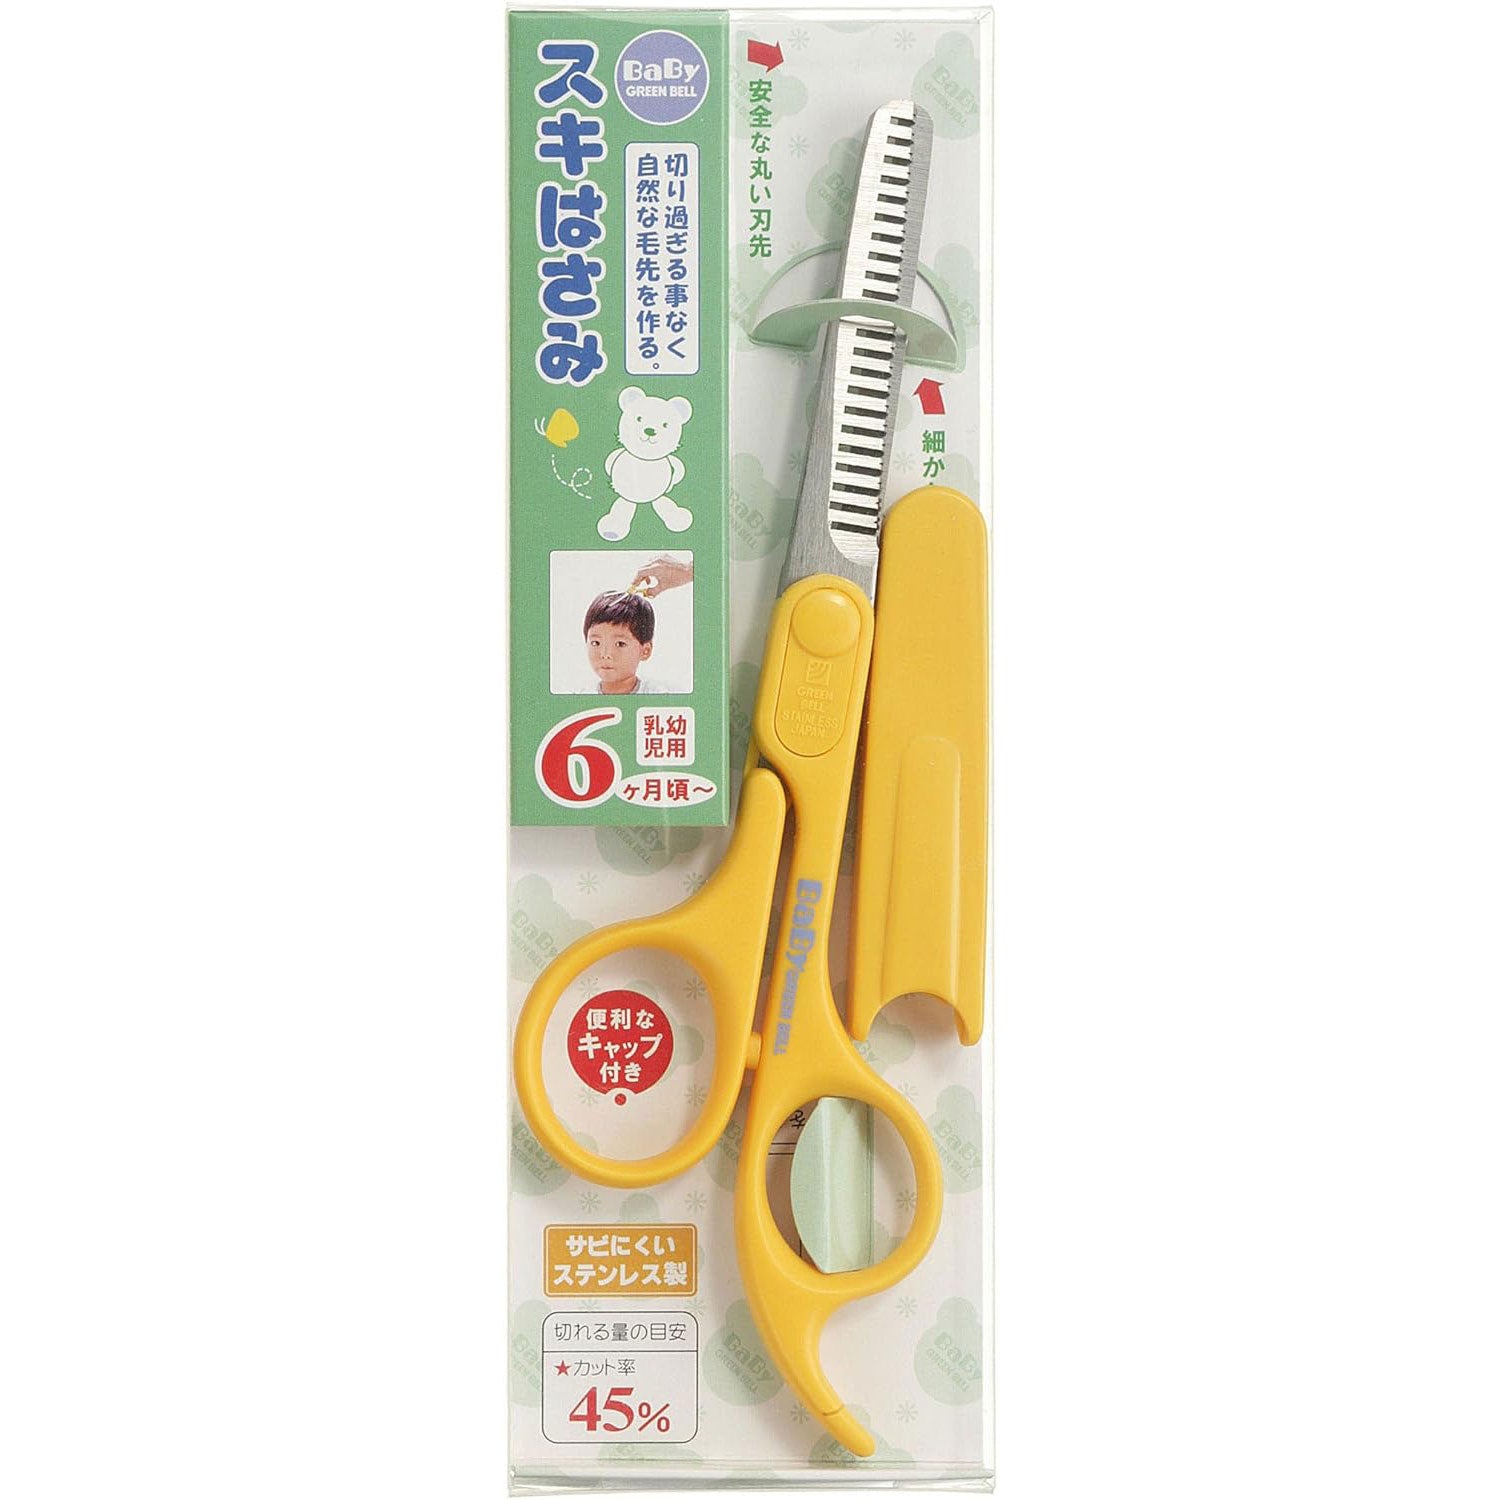 Green Bell infants Barber Scissors Hair Cutting Thinning Shears 6m+ Made In Japan